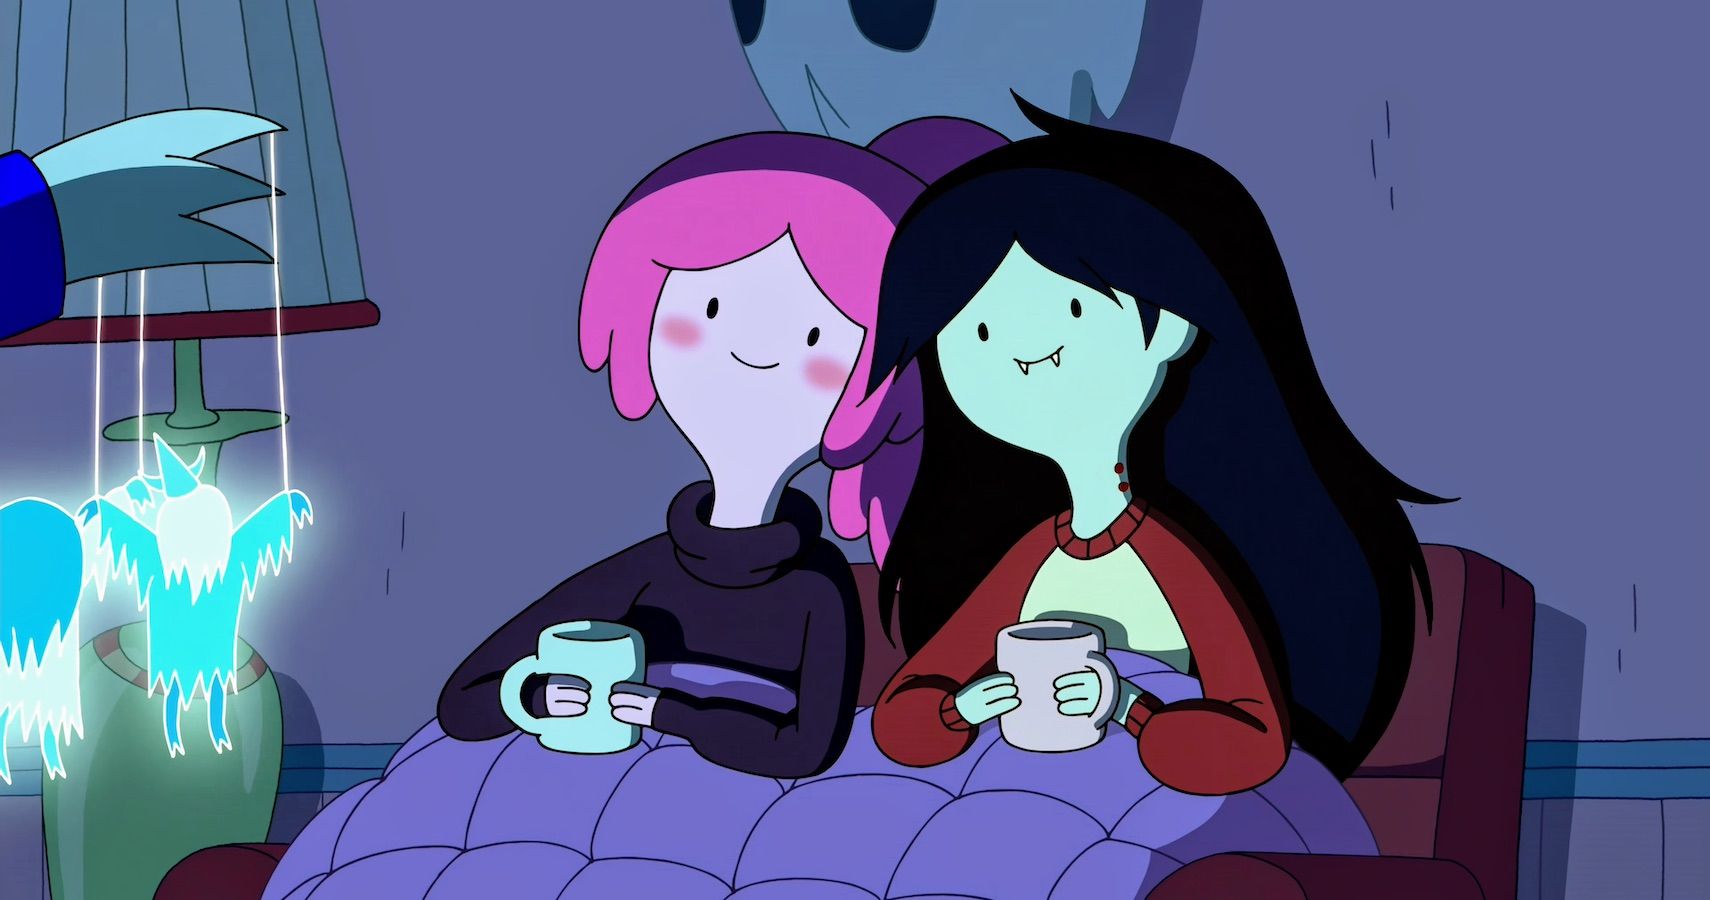 I Will Go Down with This Ship: Princess Bubblegum and Marceline Edition